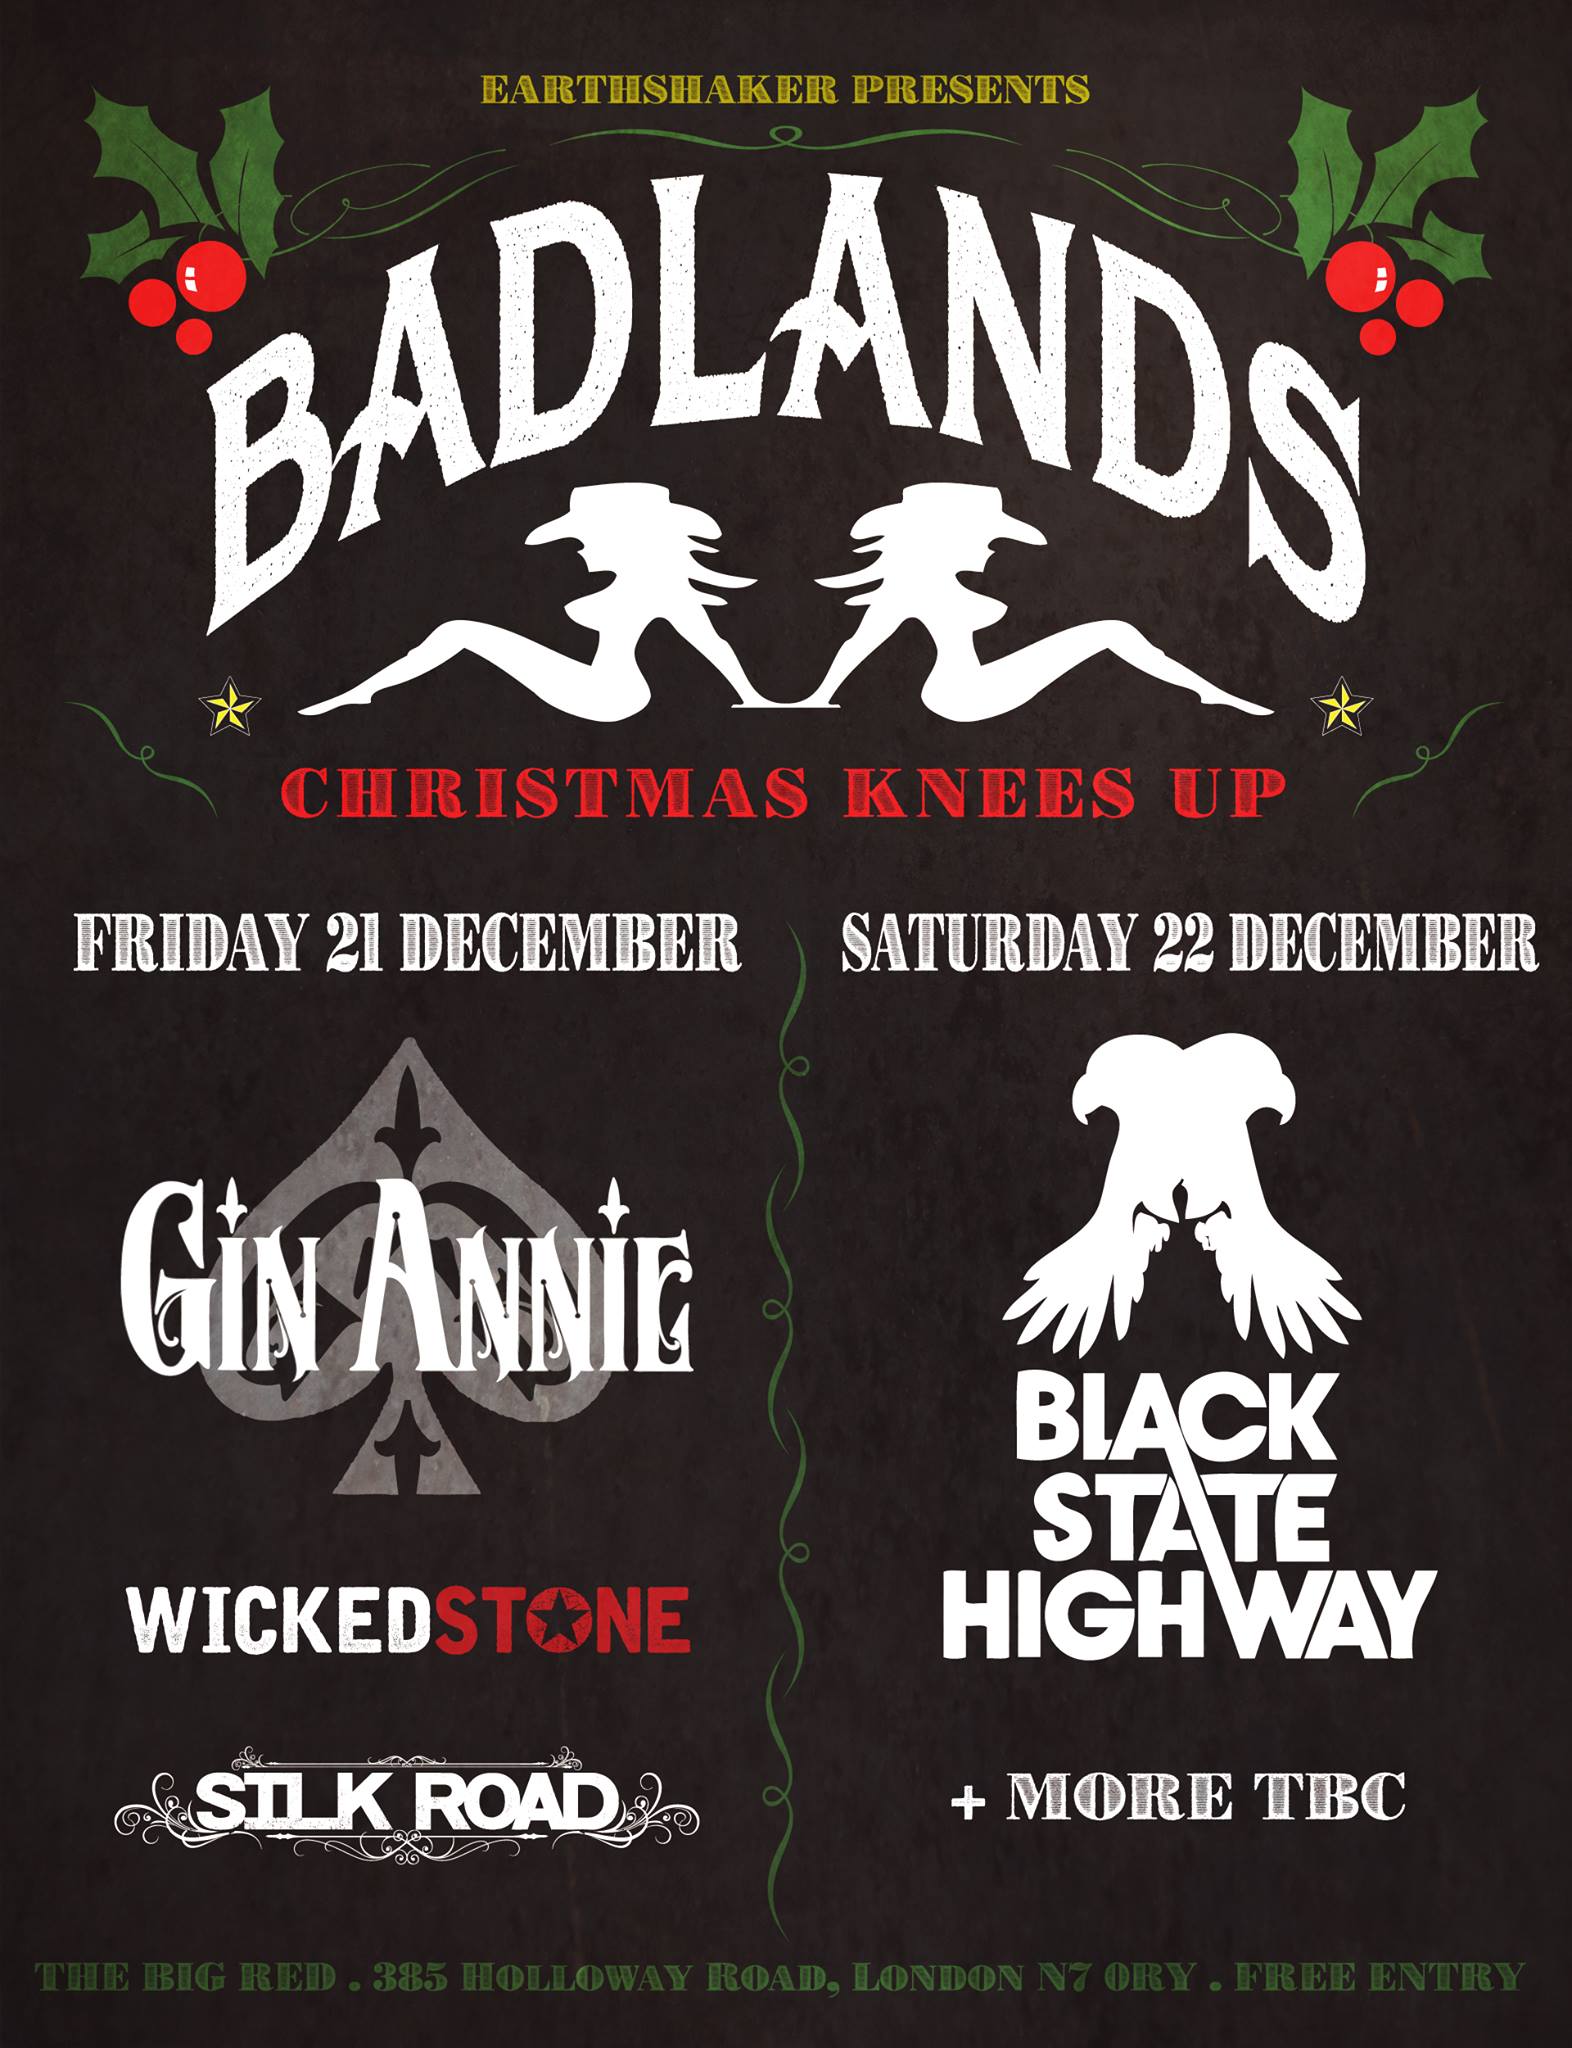 Big Red N Logo - Badlands Christmas knees up - Two nights of pure rock n' roll! @ The ...